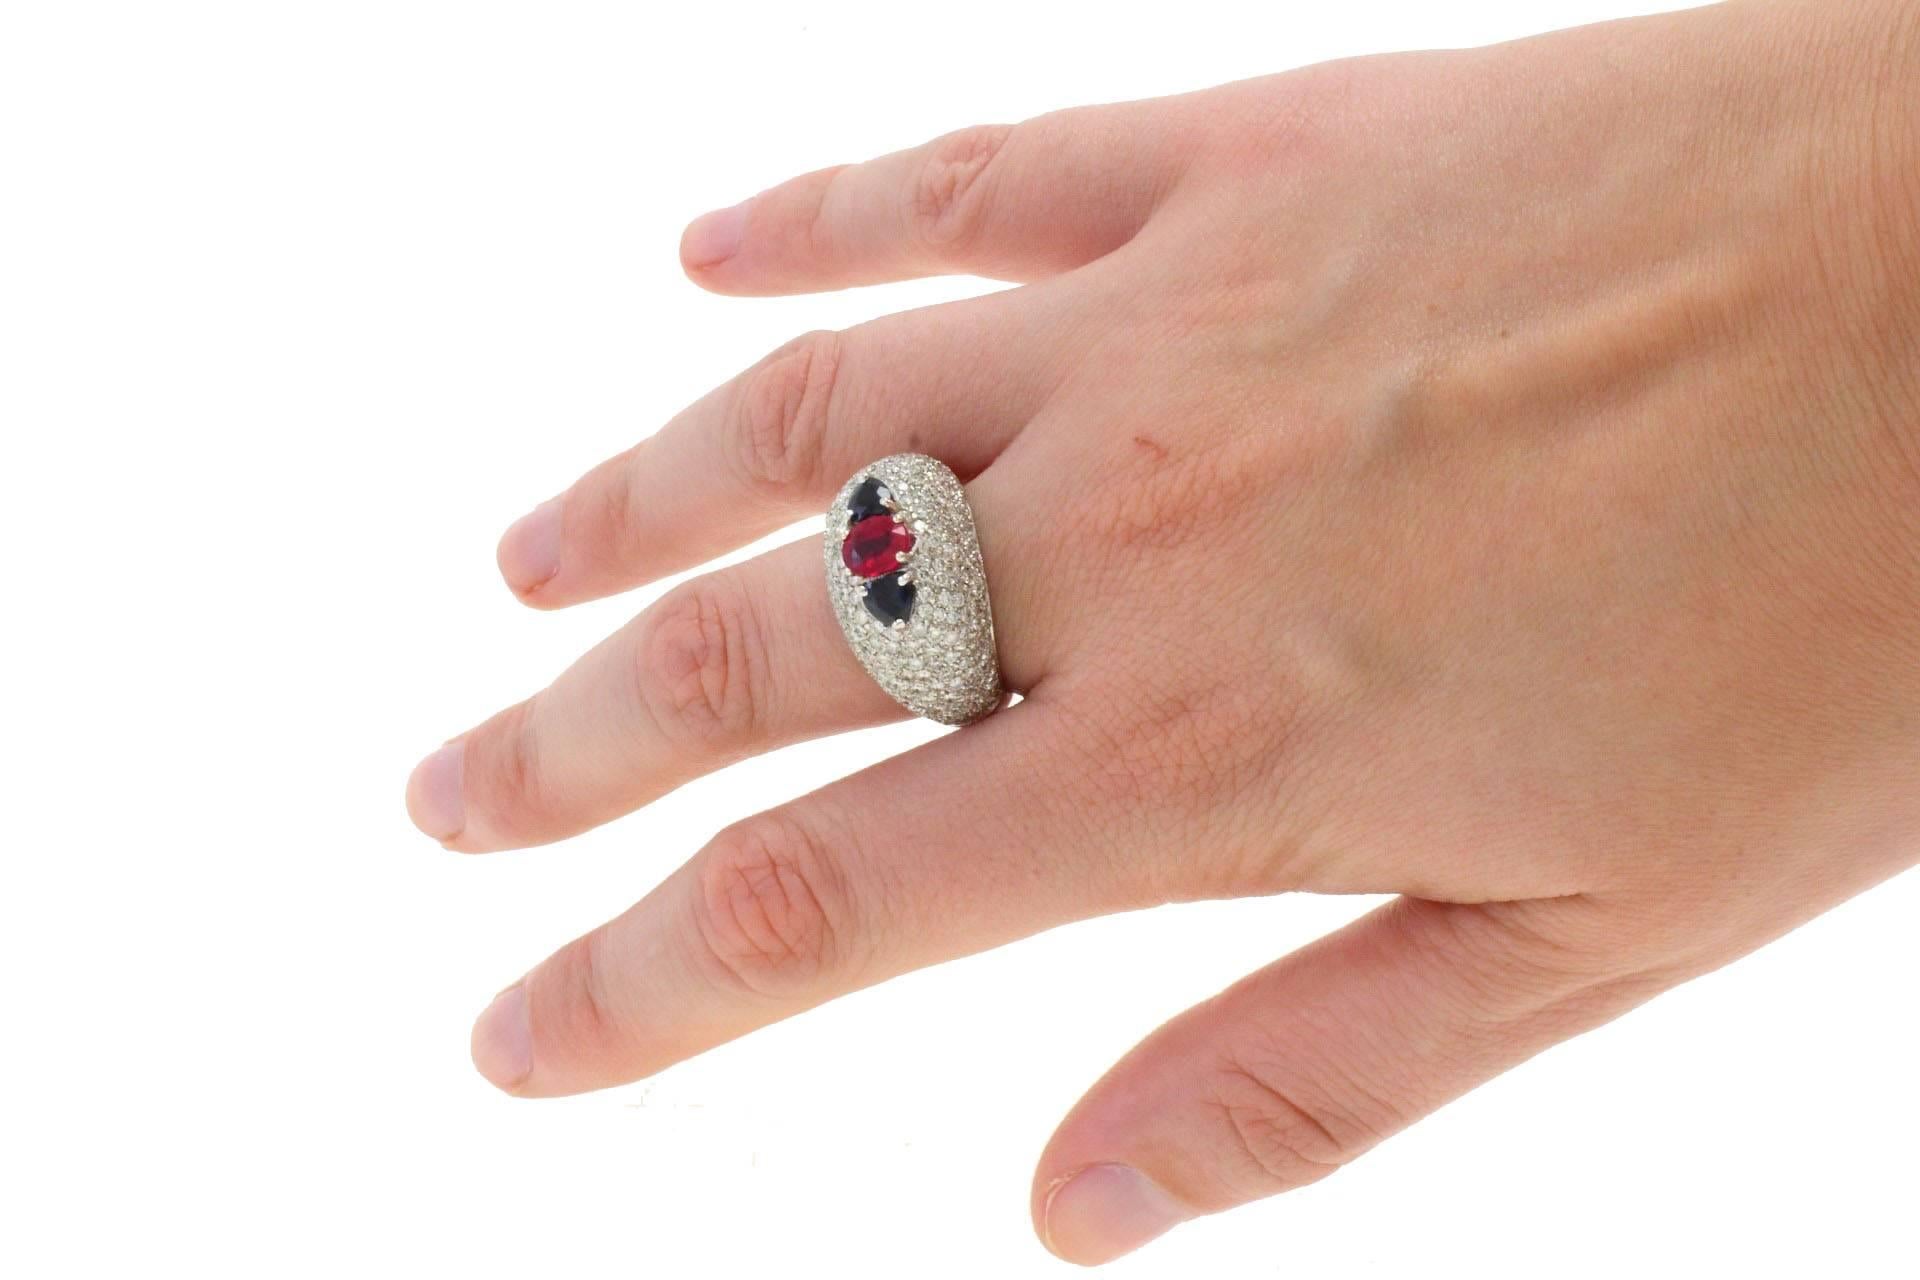 Women's 3.20 ct Diamonds, 2.15 ct Central Ruby and Blue Sapphires, White Gold Dome Ring